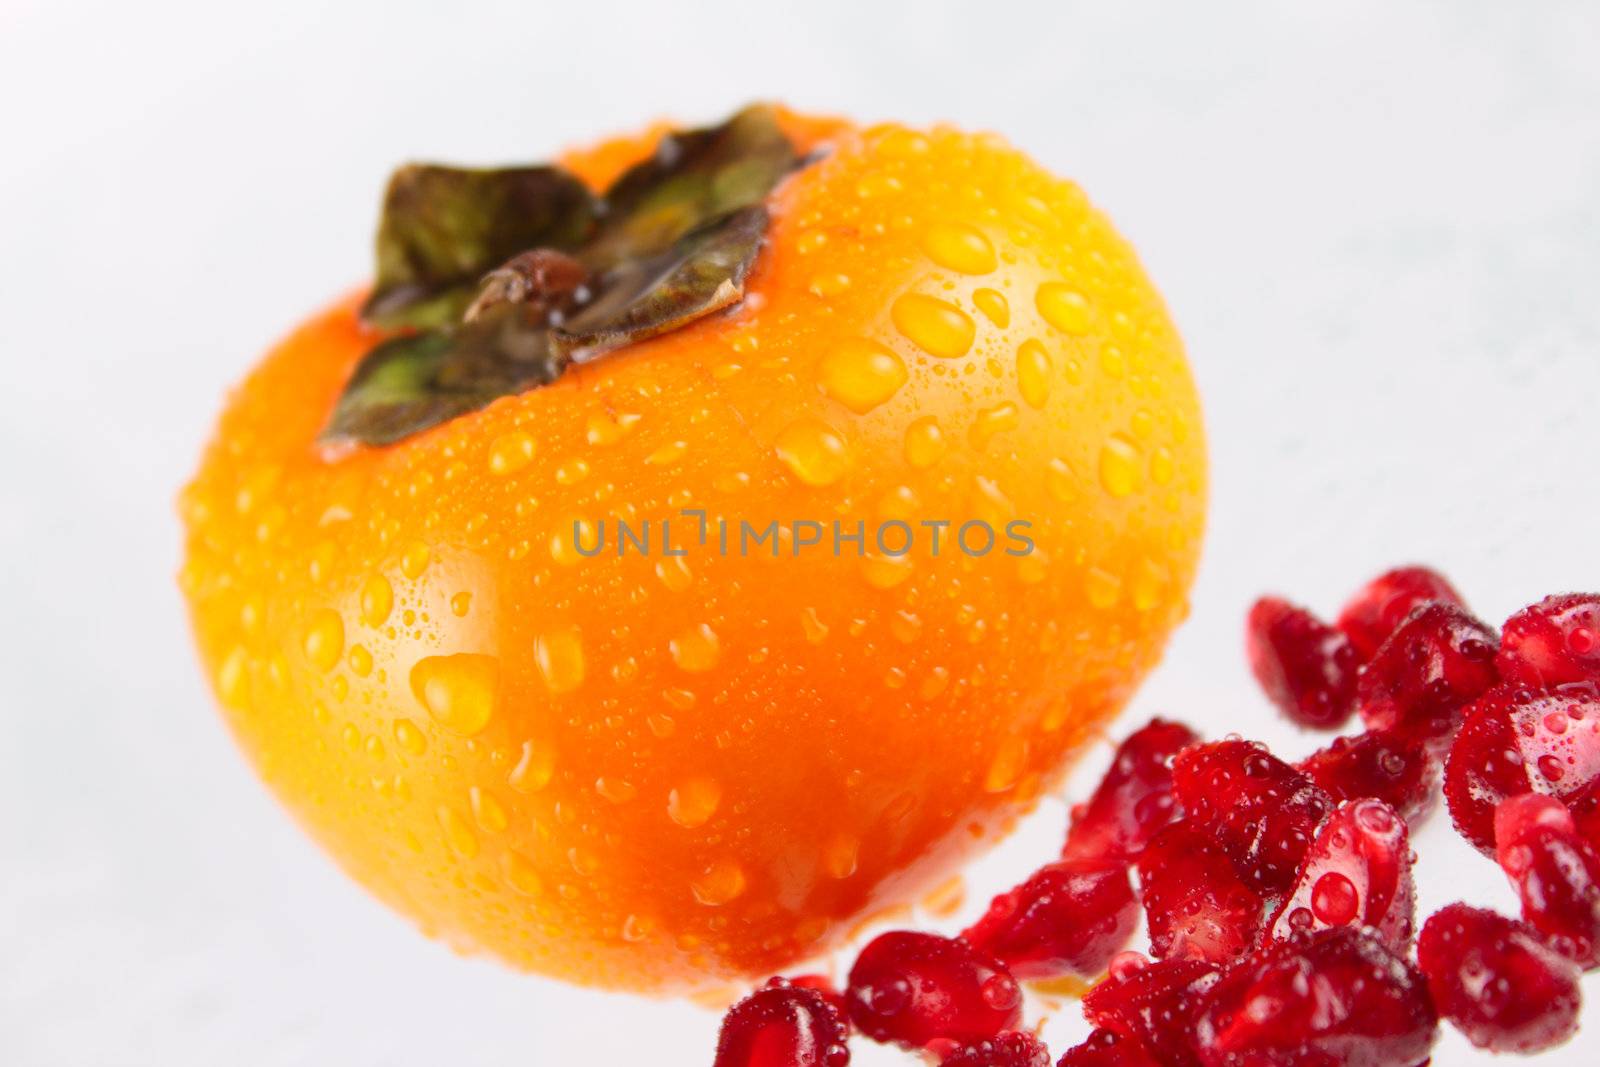 Grains pomegranate and persimmon by Incarnatus